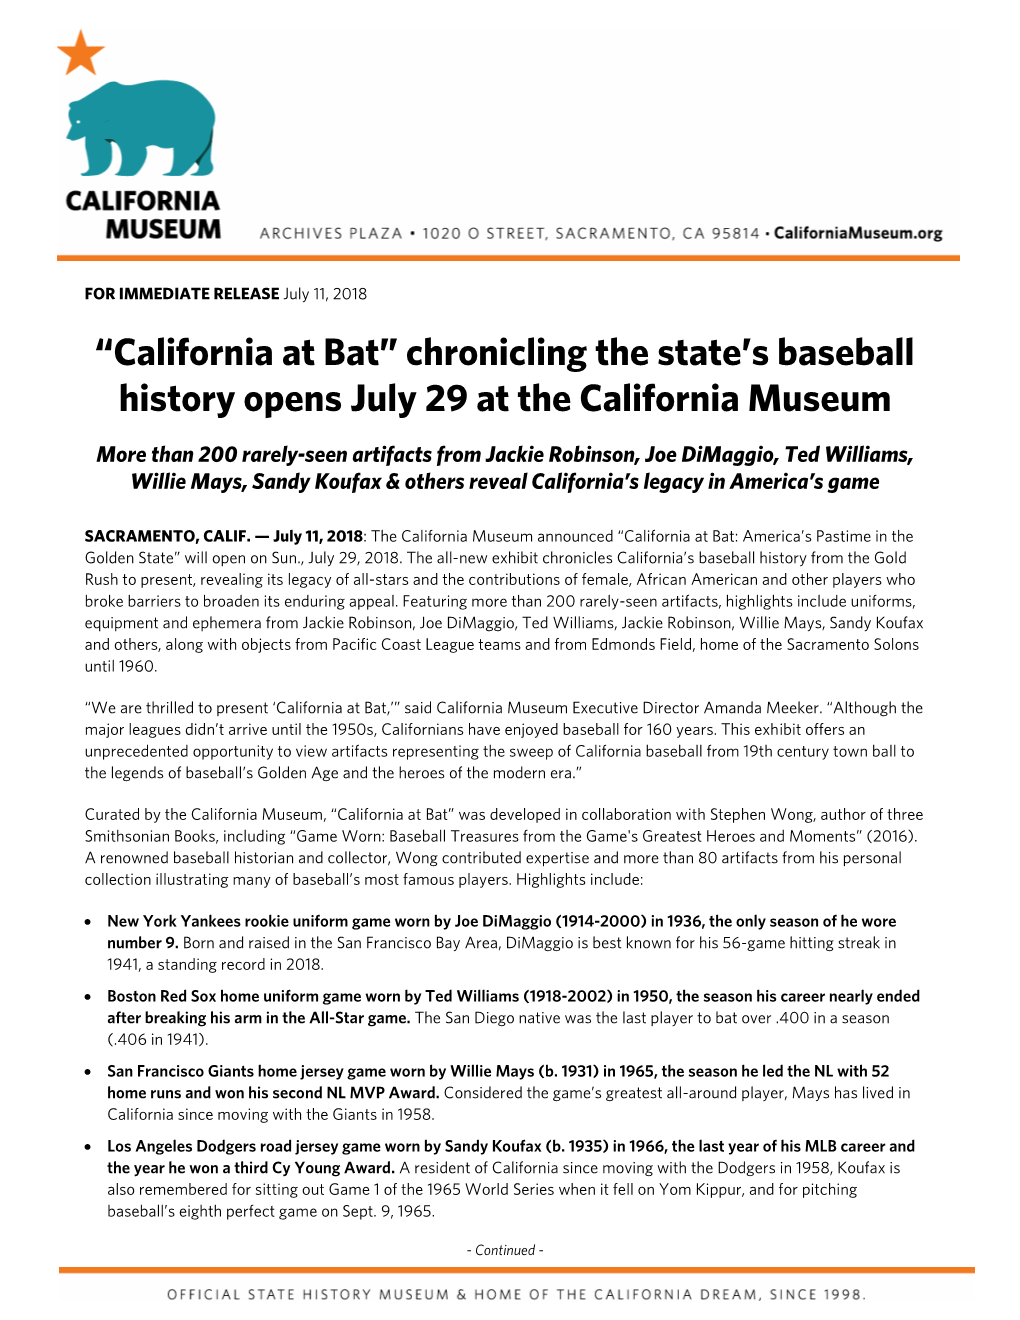 “California at Bat” Chronicling the State's Baseball History Opens July 29 at the California Museum